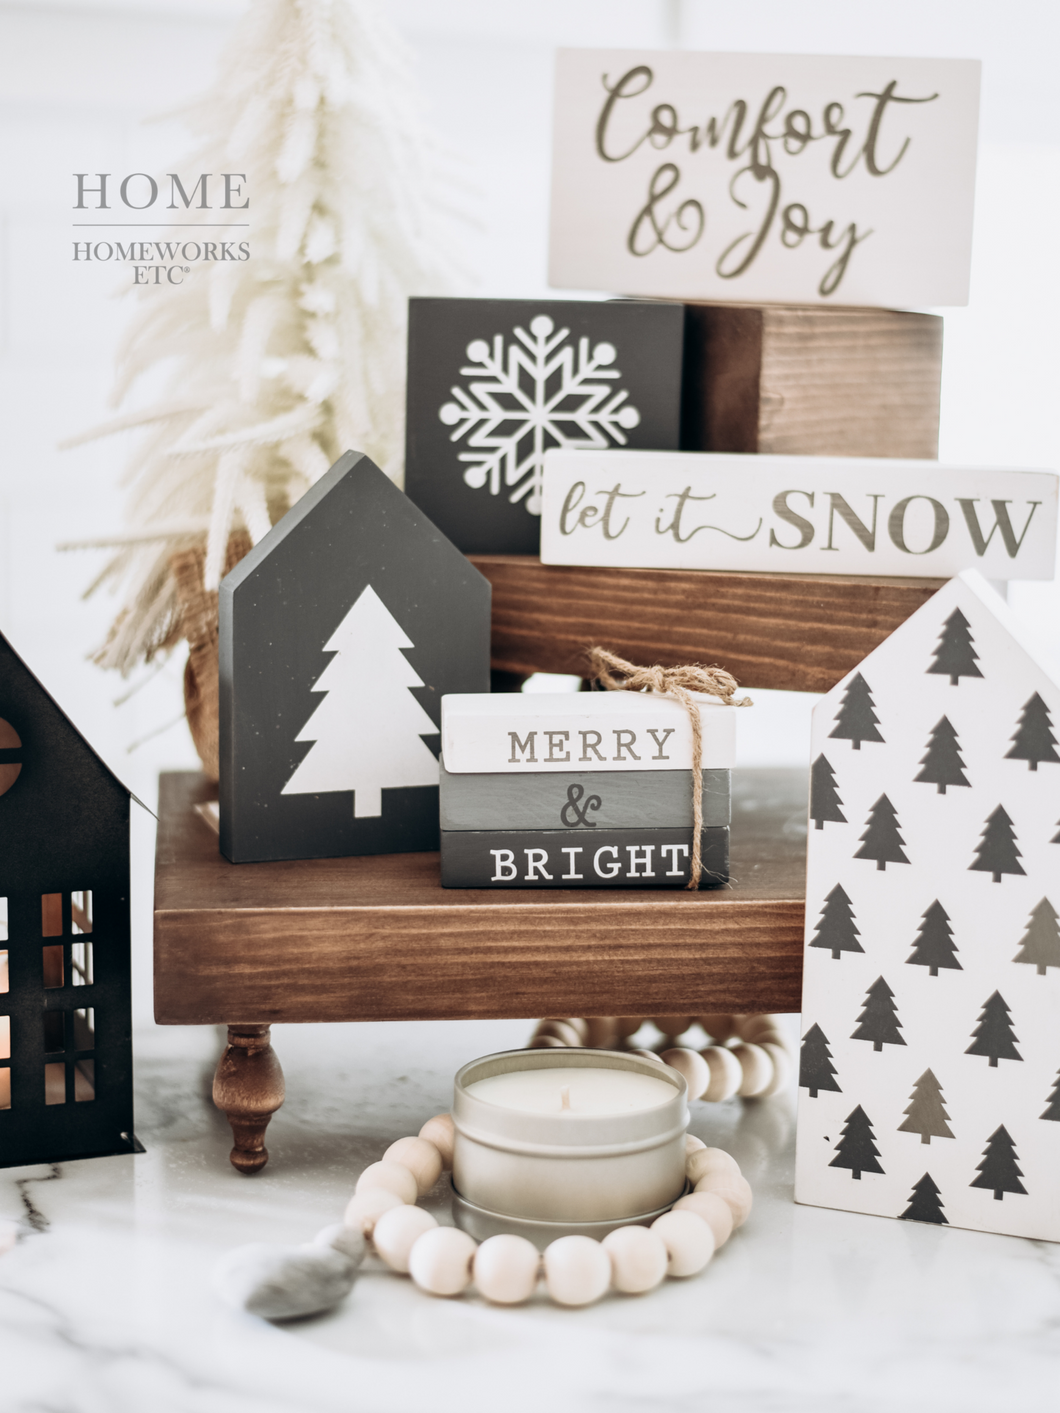 Replying to @makeitwithmicah DIY Christmas / Winter Wonderland Themed